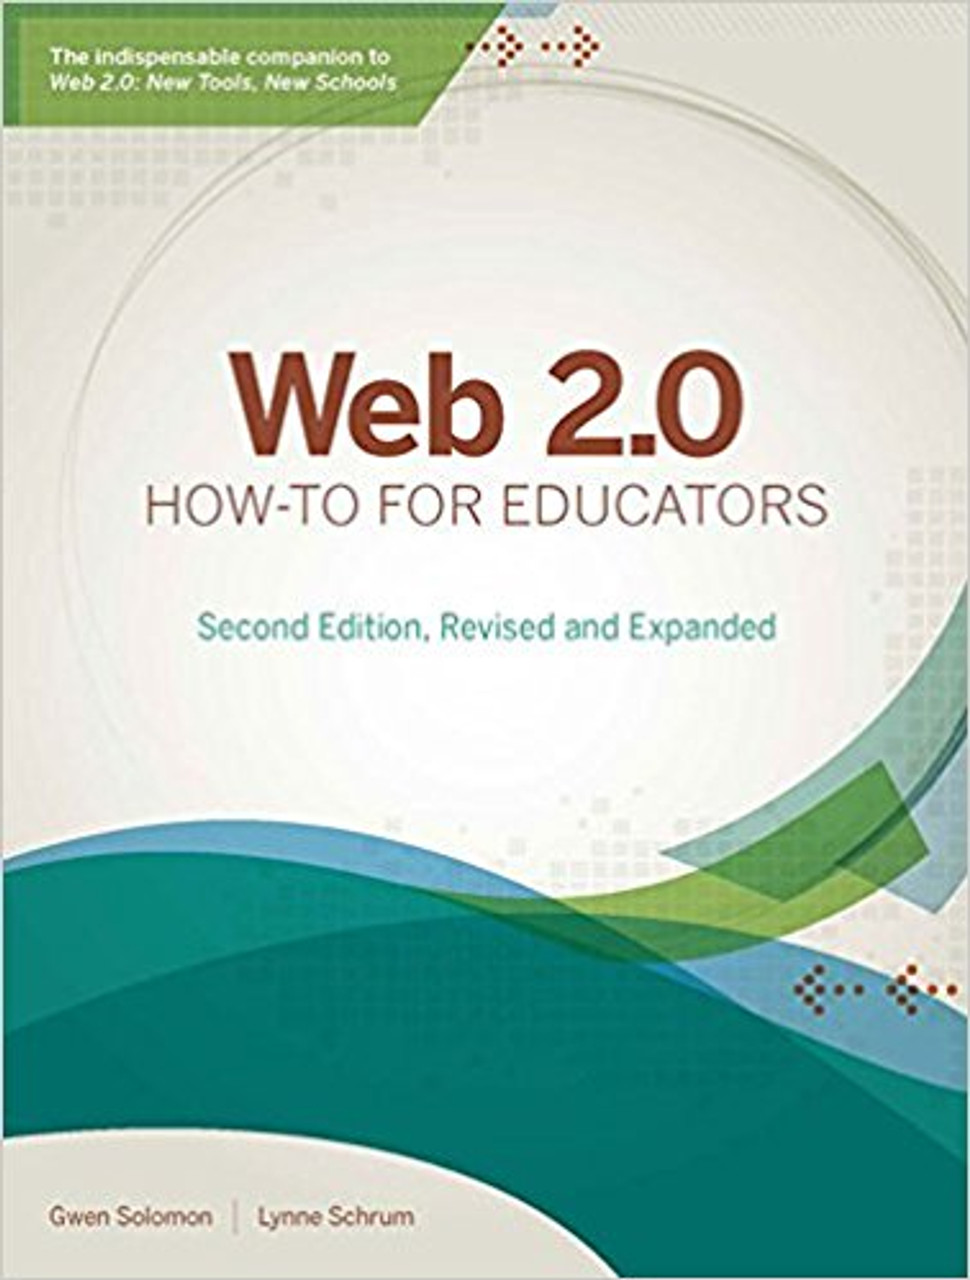 Web 2.0 How-To for Educators by Gwen Solomon